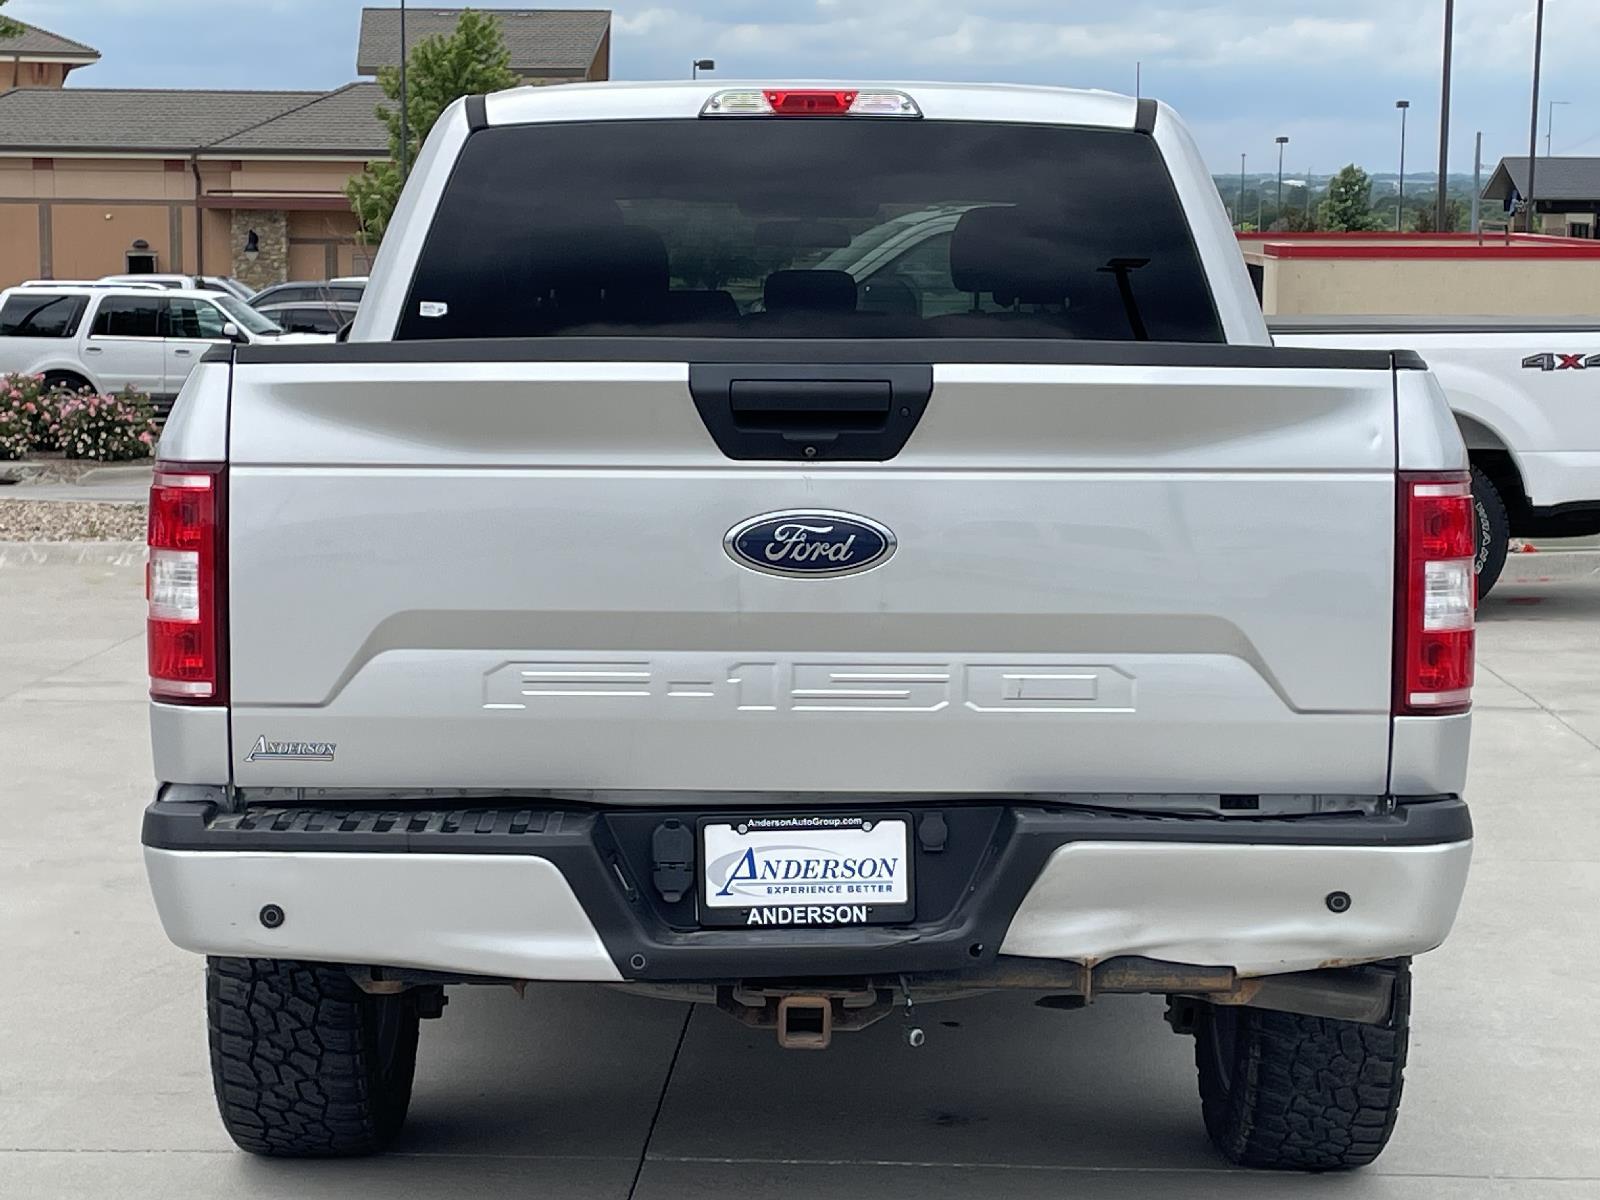 Used 2018 Ford F-150 XL Crew Cab Truck for sale in Lincoln NE